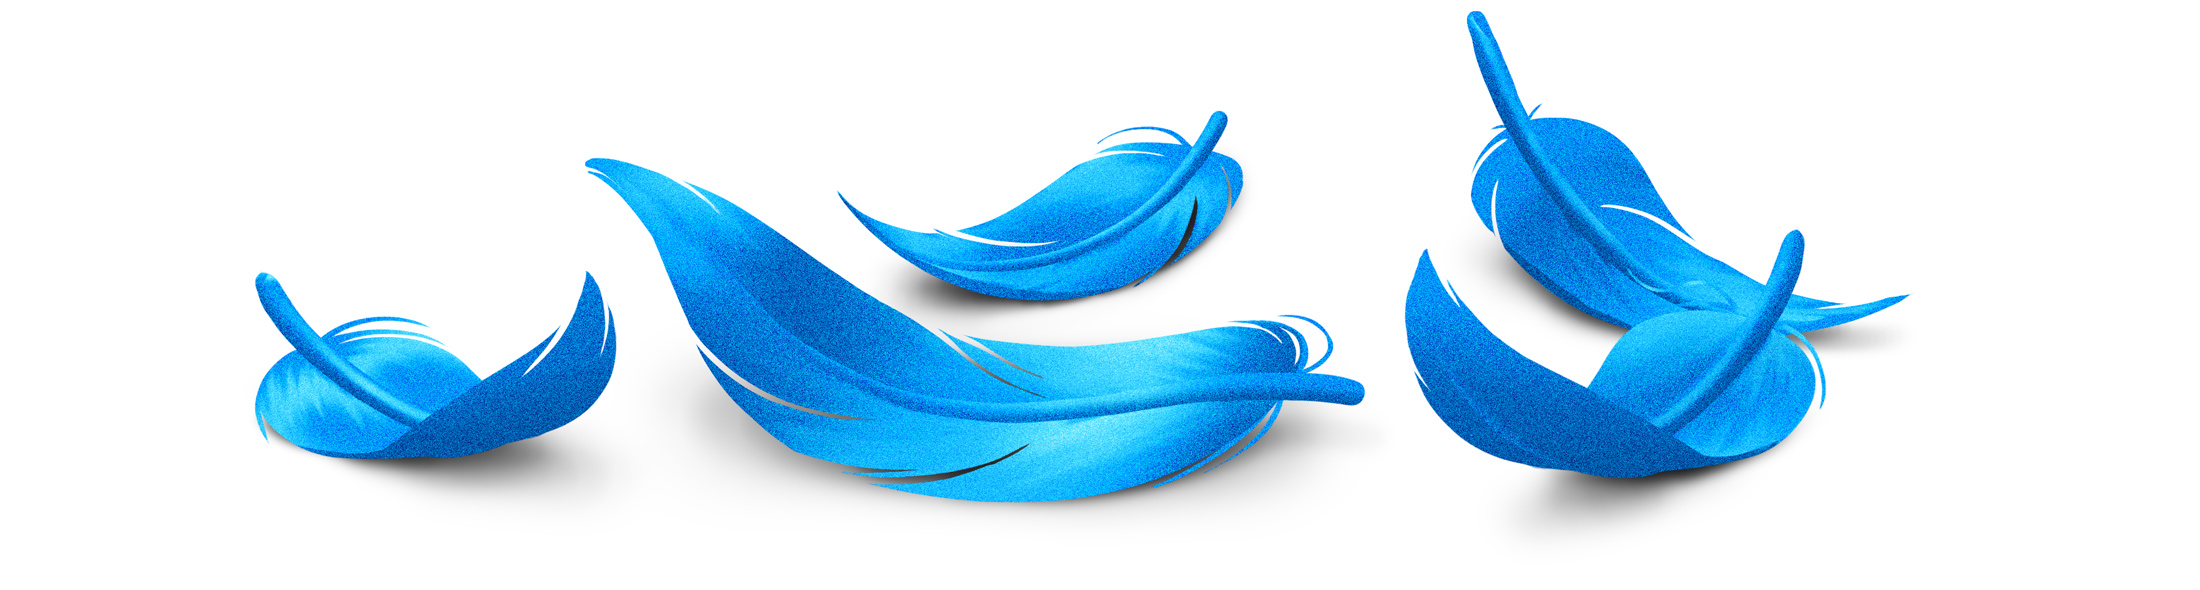 Illustration of blue feathers on the ground